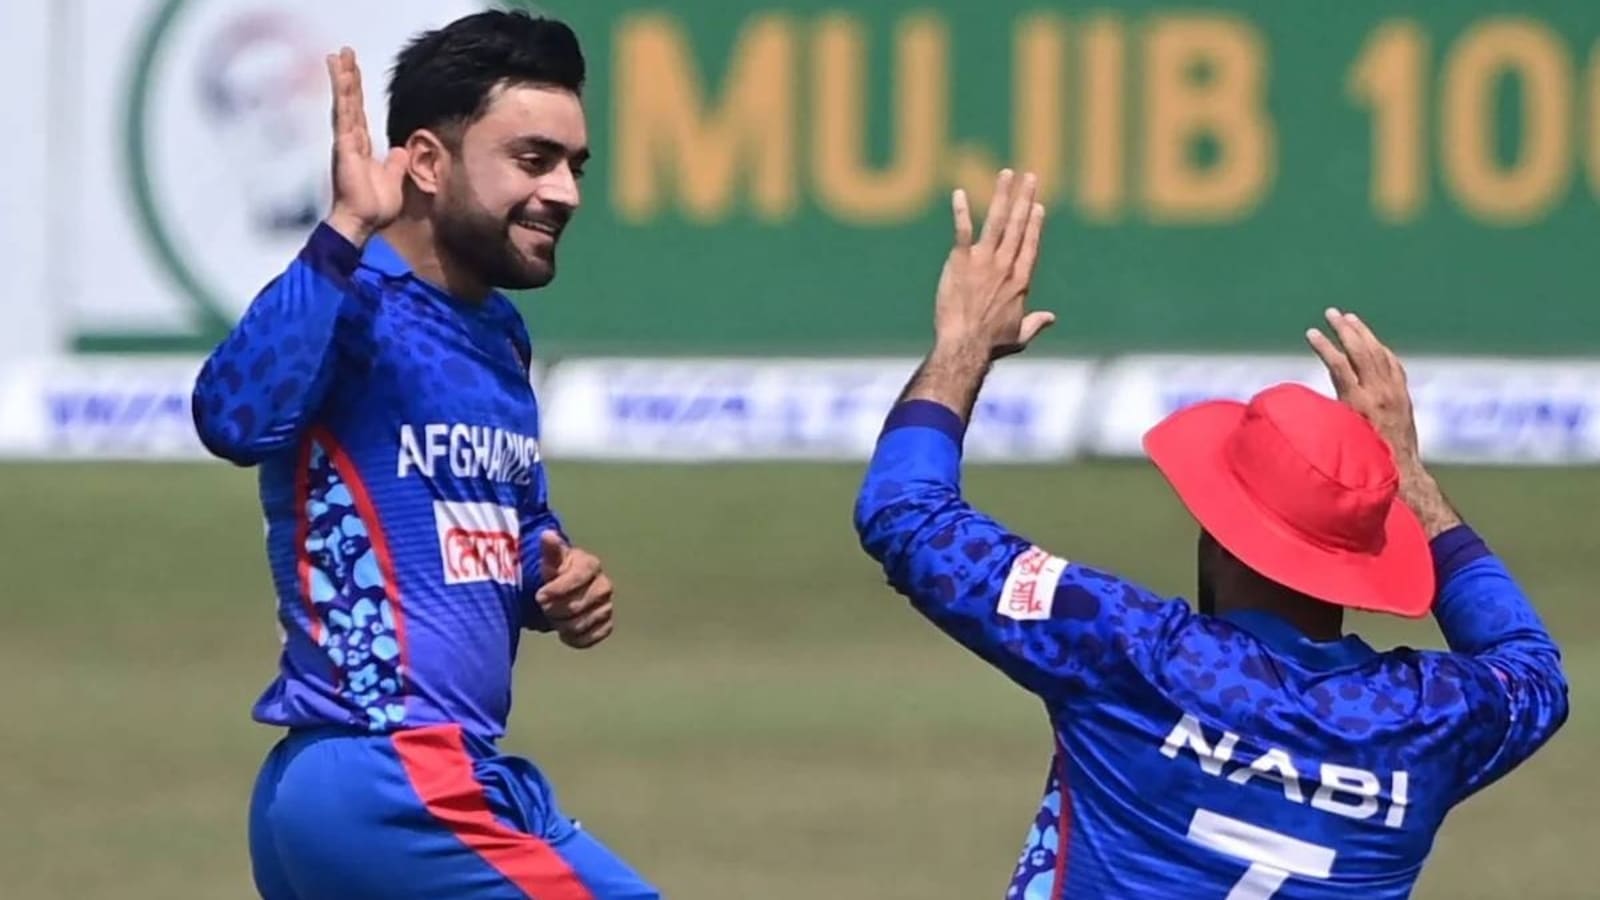 sri-lanka-vs-afghanistan-asia-cup-2022-highlights-afg-race-to-8-wicket-win-blow-sl-away-in-tournament-opener